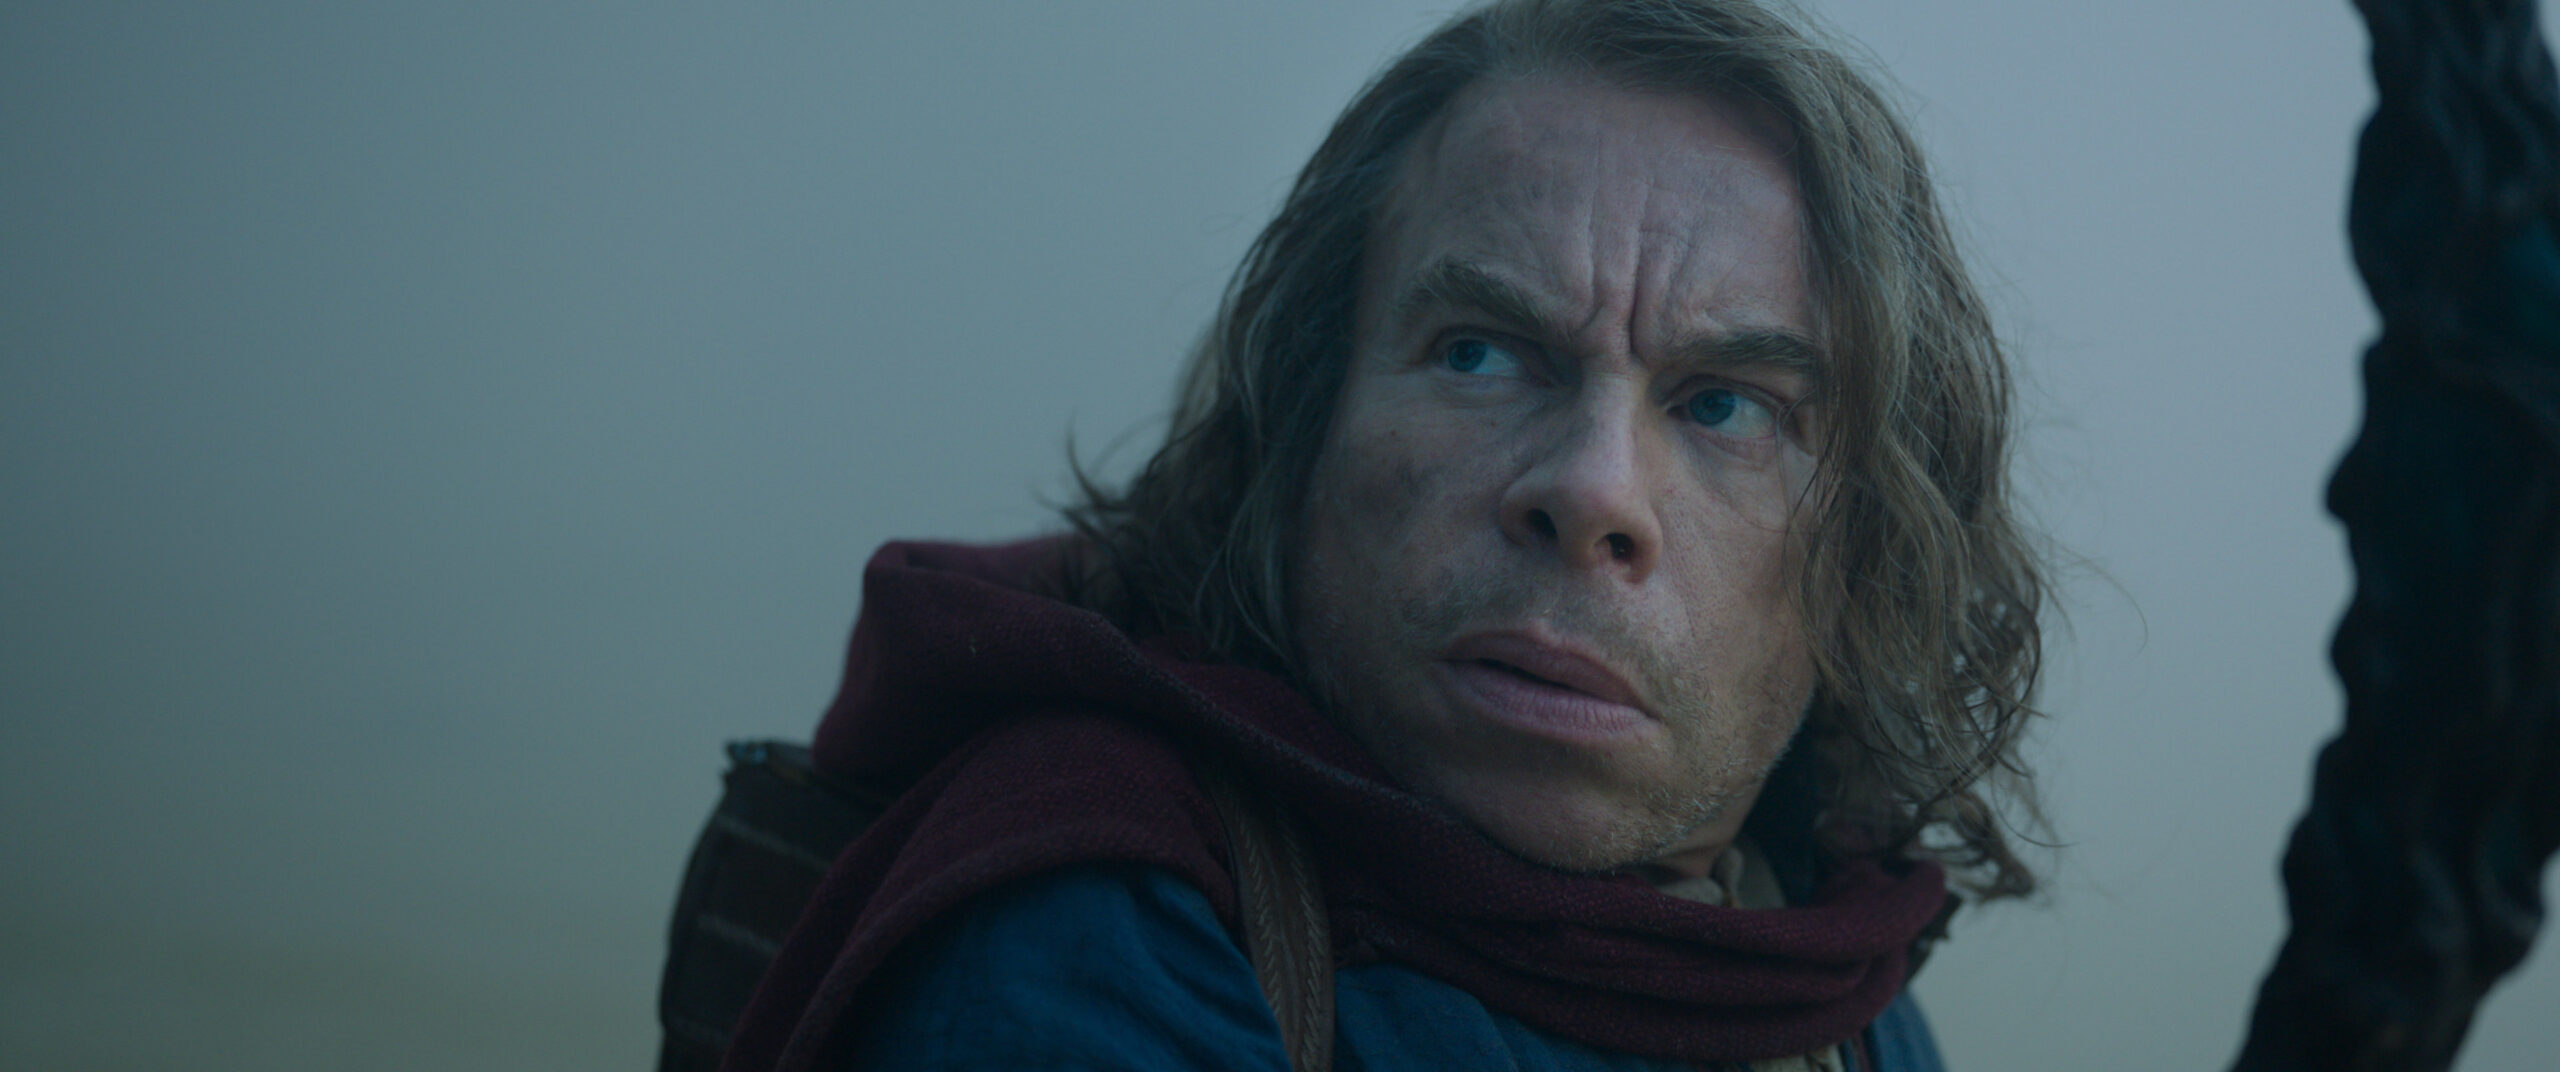 Warwick Davis as title character Willow in the canceled Disney+ show.